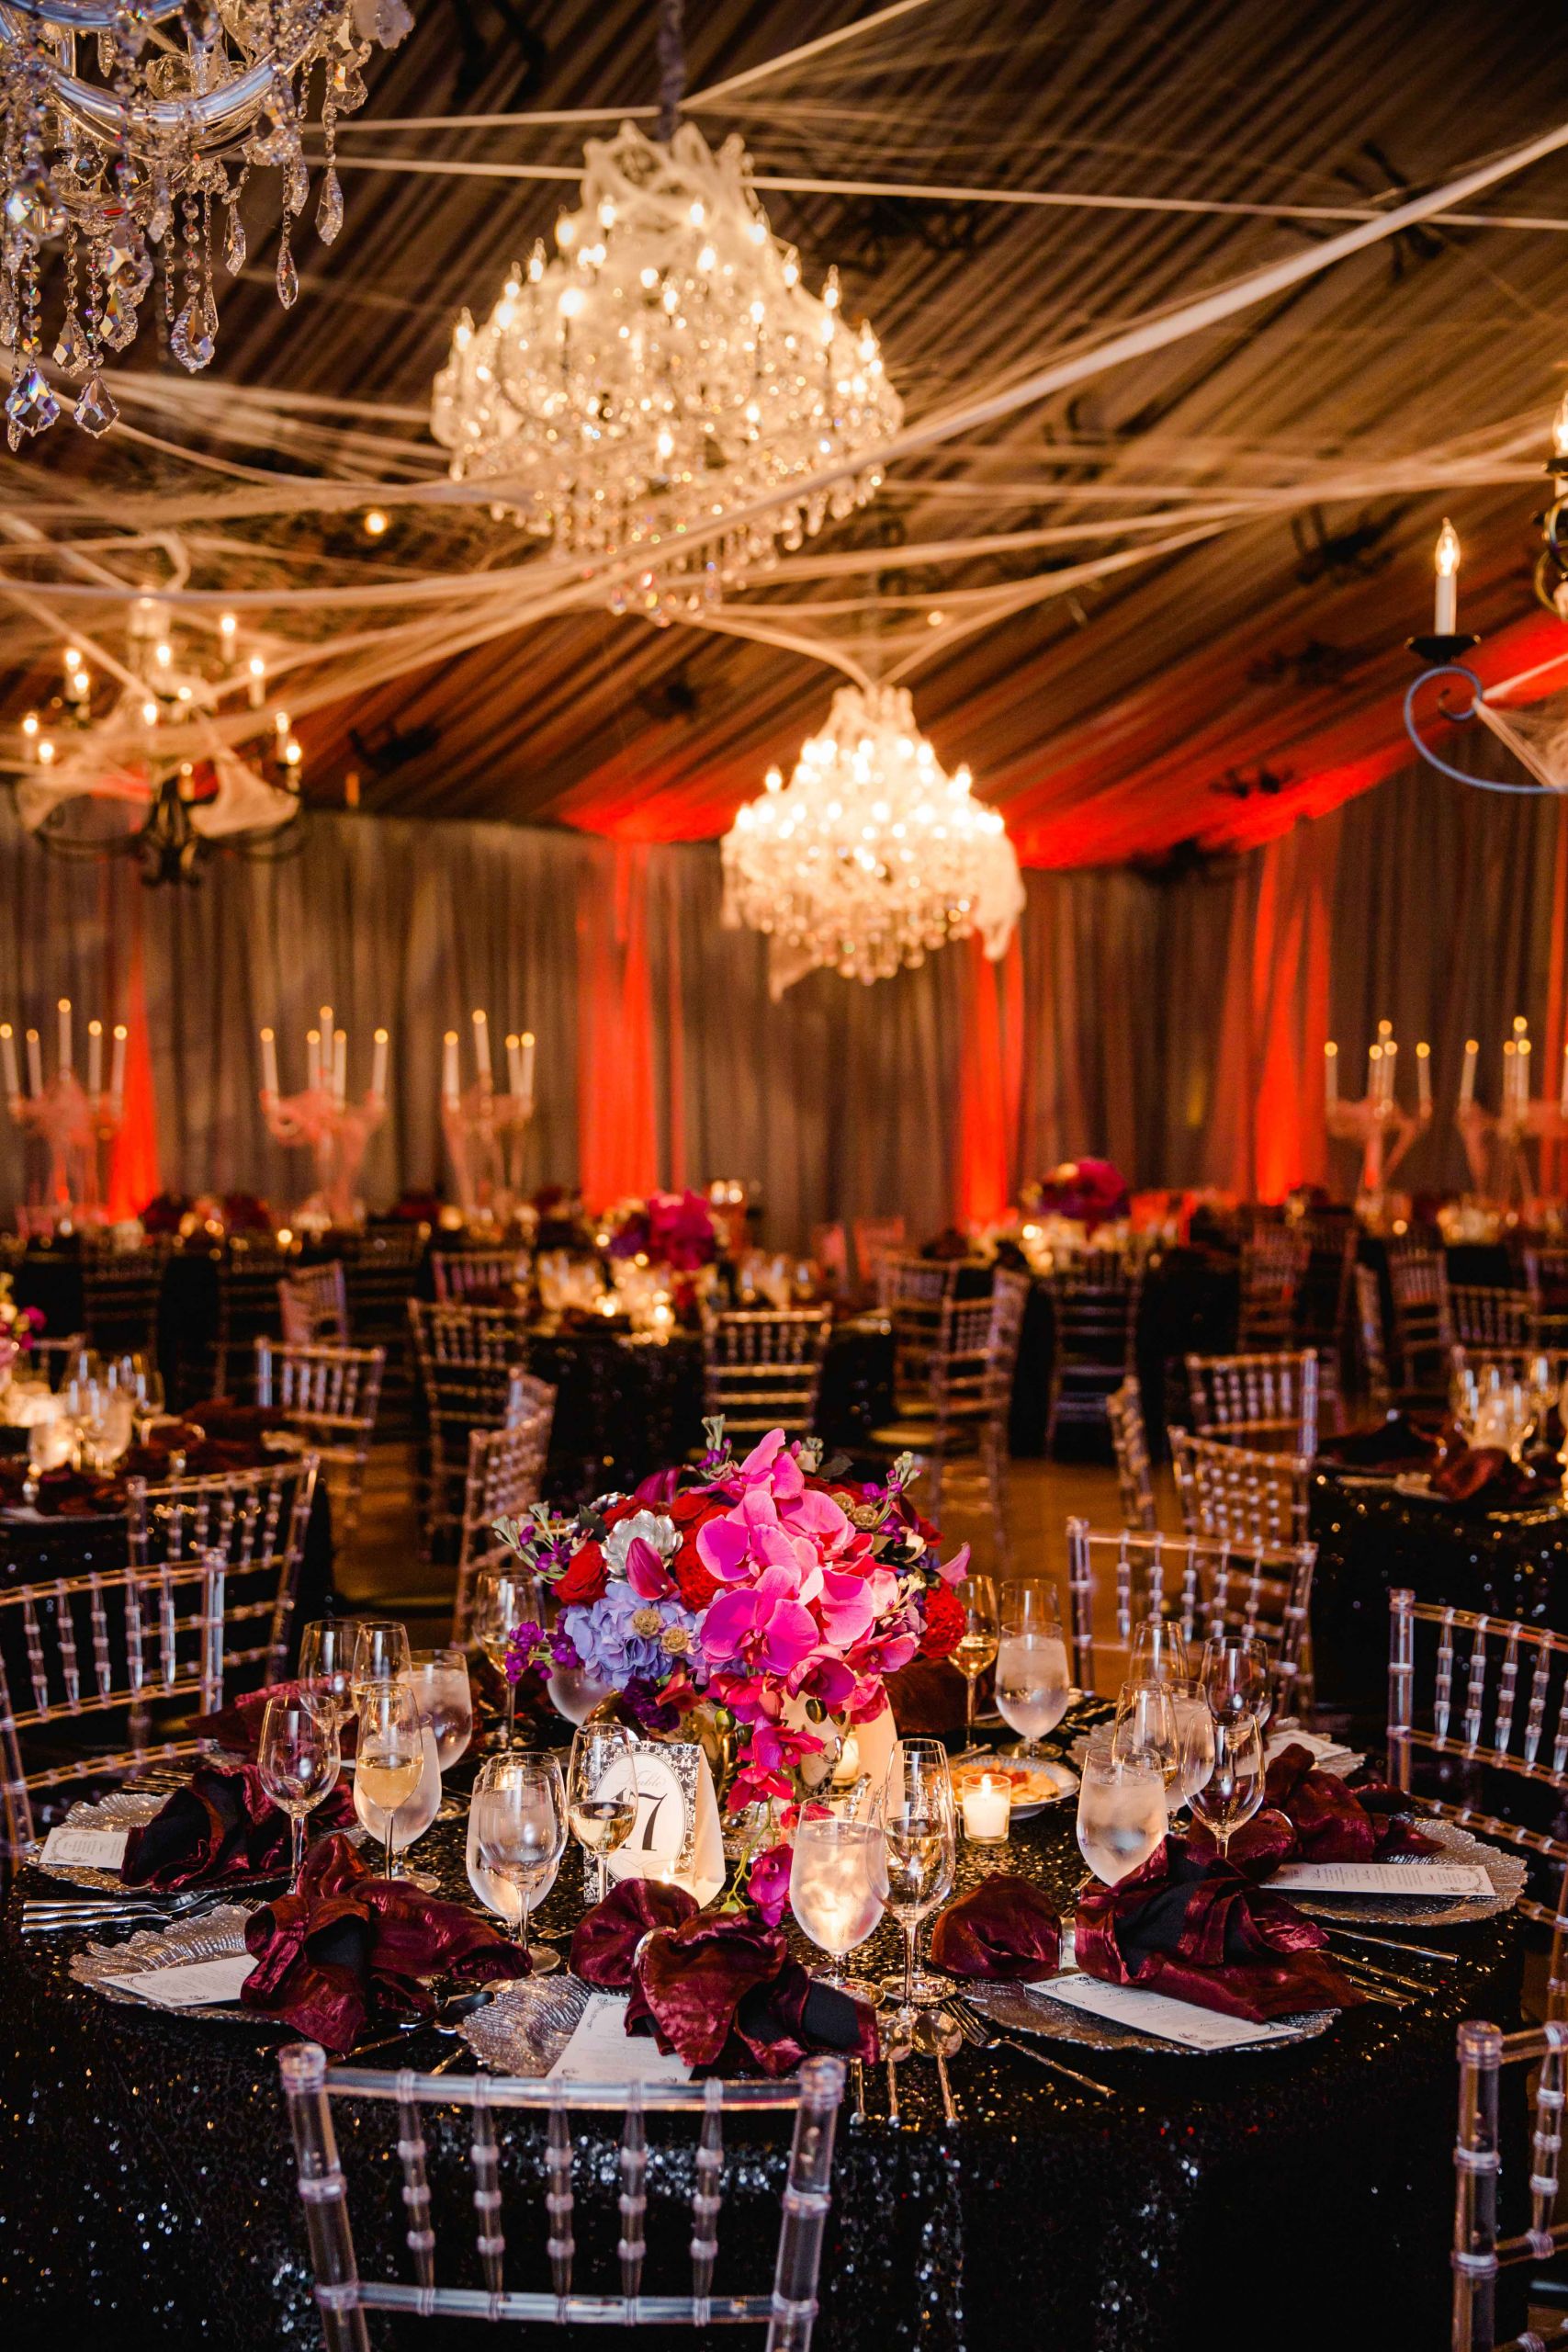 Halloween Themed Wedding
 A Chic and Sophisticated Halloween Themed Wedding Inside